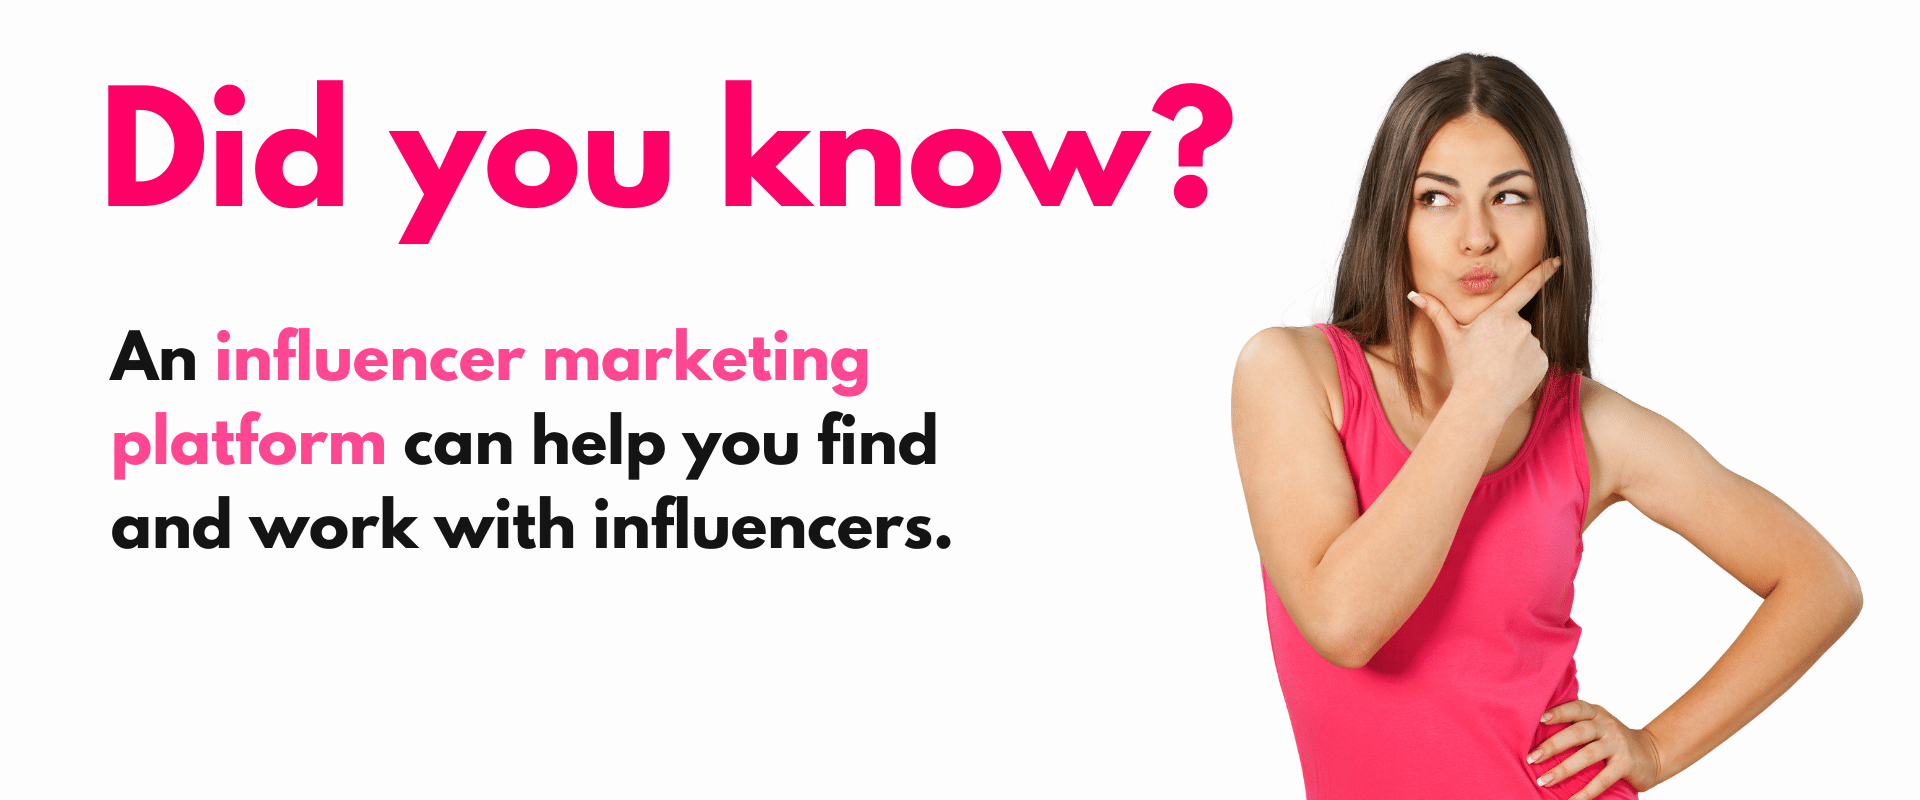 Did you know an influencer marketing platform can help you find with influencers?.